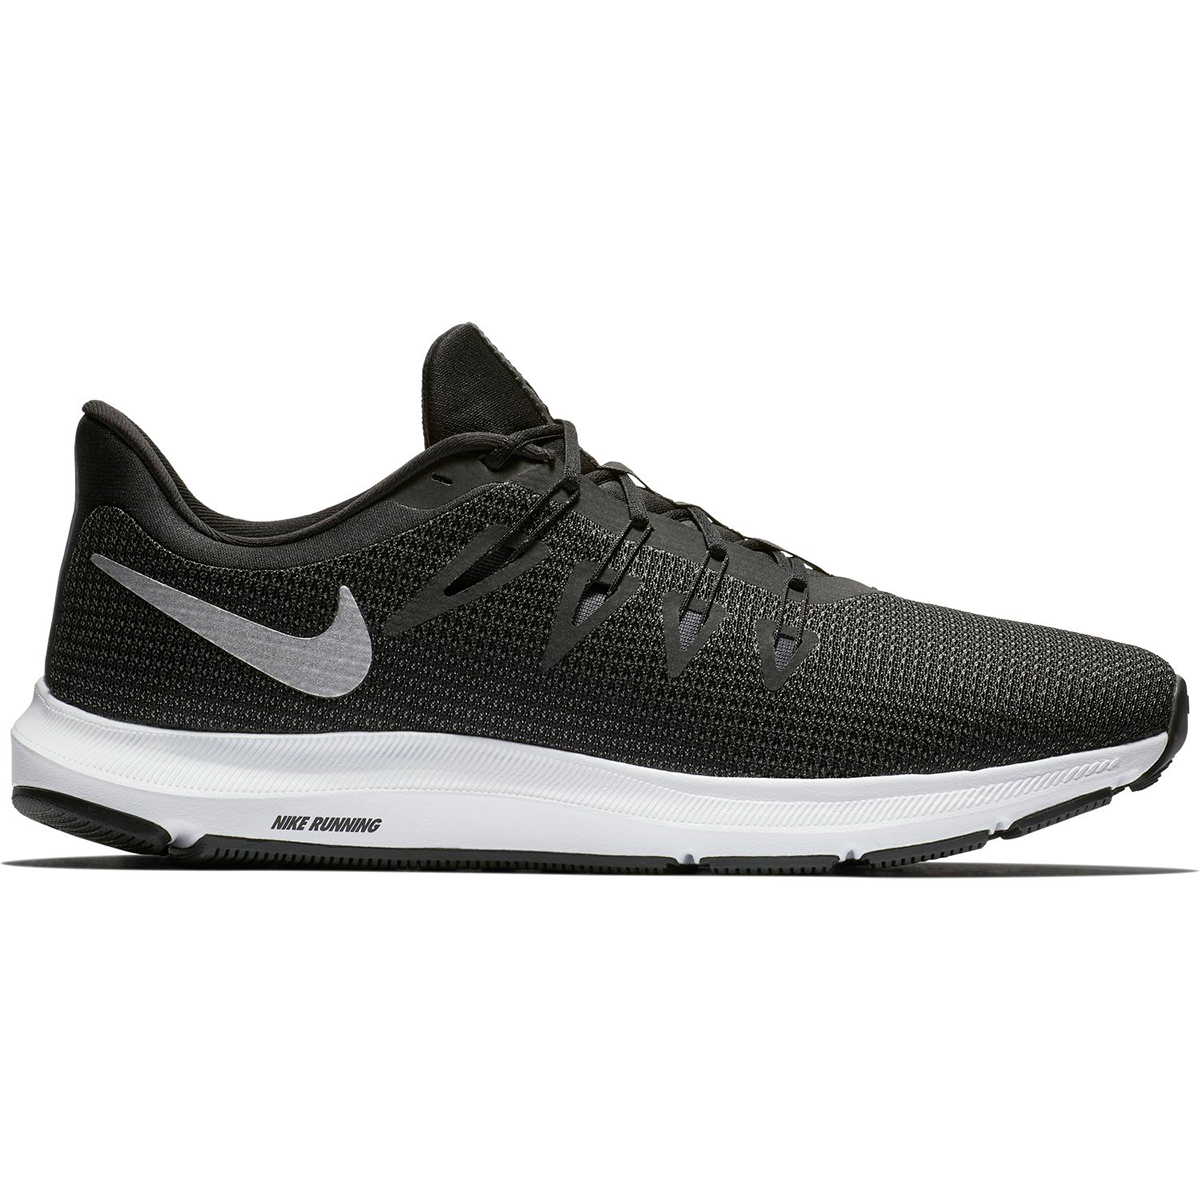 Nike Men's Quest Running Shoes